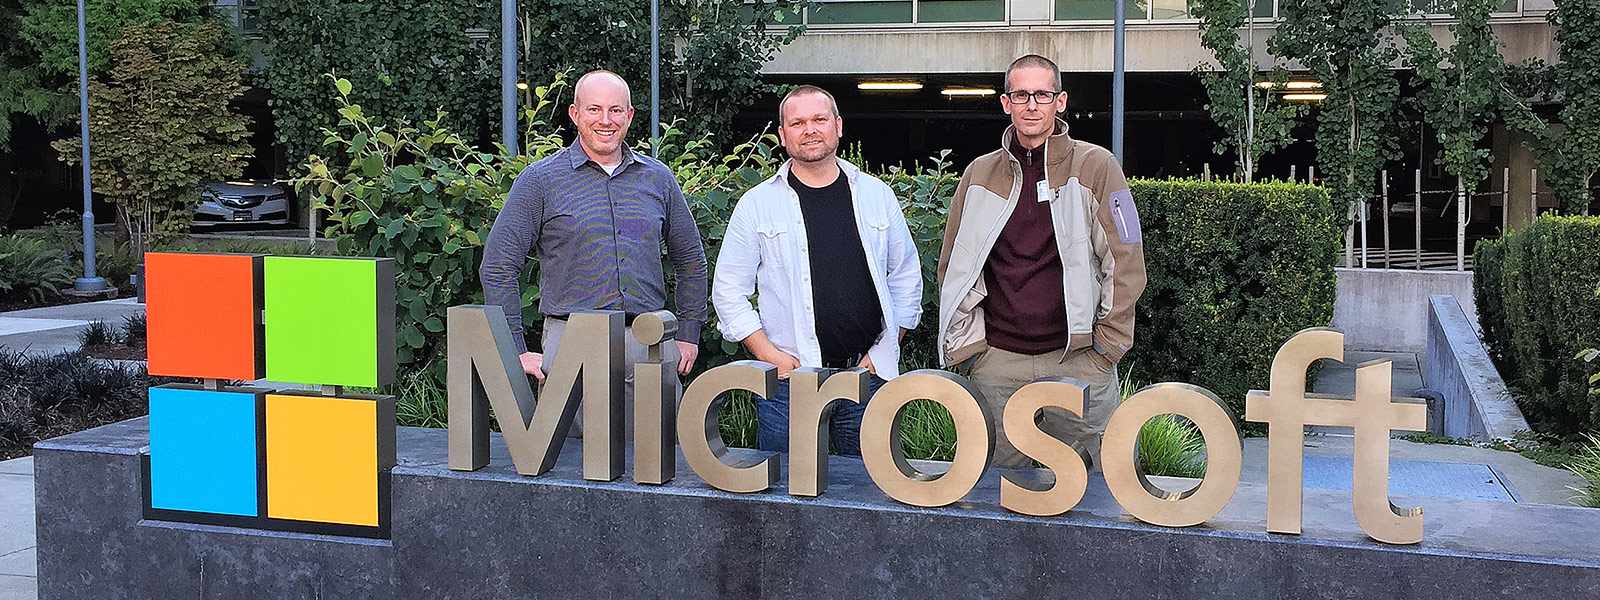 Sean working on Windows 10 IOT Product Release at Microsoft Redmond, WA Campus - About Sean Rose